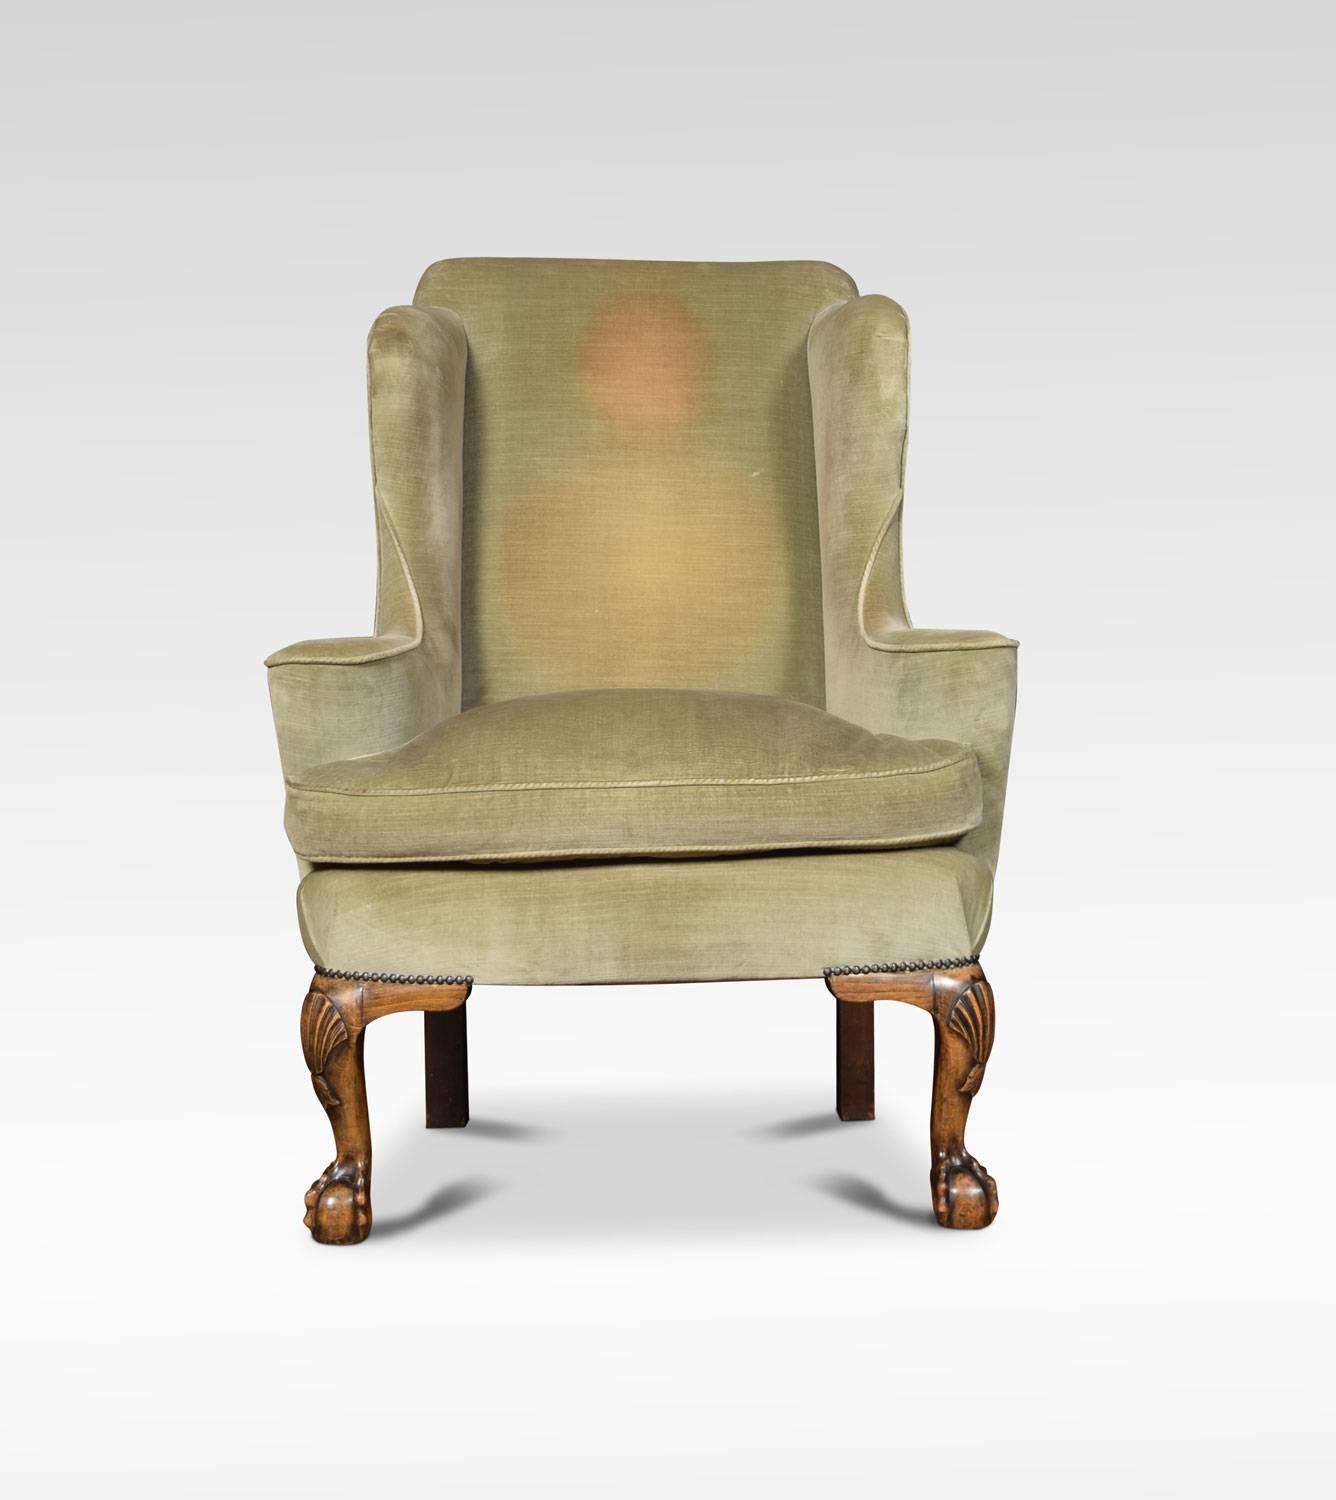 A Georgian style armchair, the winged back and upholstered seat, flaked by out swept arms. All raised up on cabriole front sports terminating in claw and ball feet.
Dimensions:
Height 45.5 inches height to seat 23.5 inches
Width 33.5